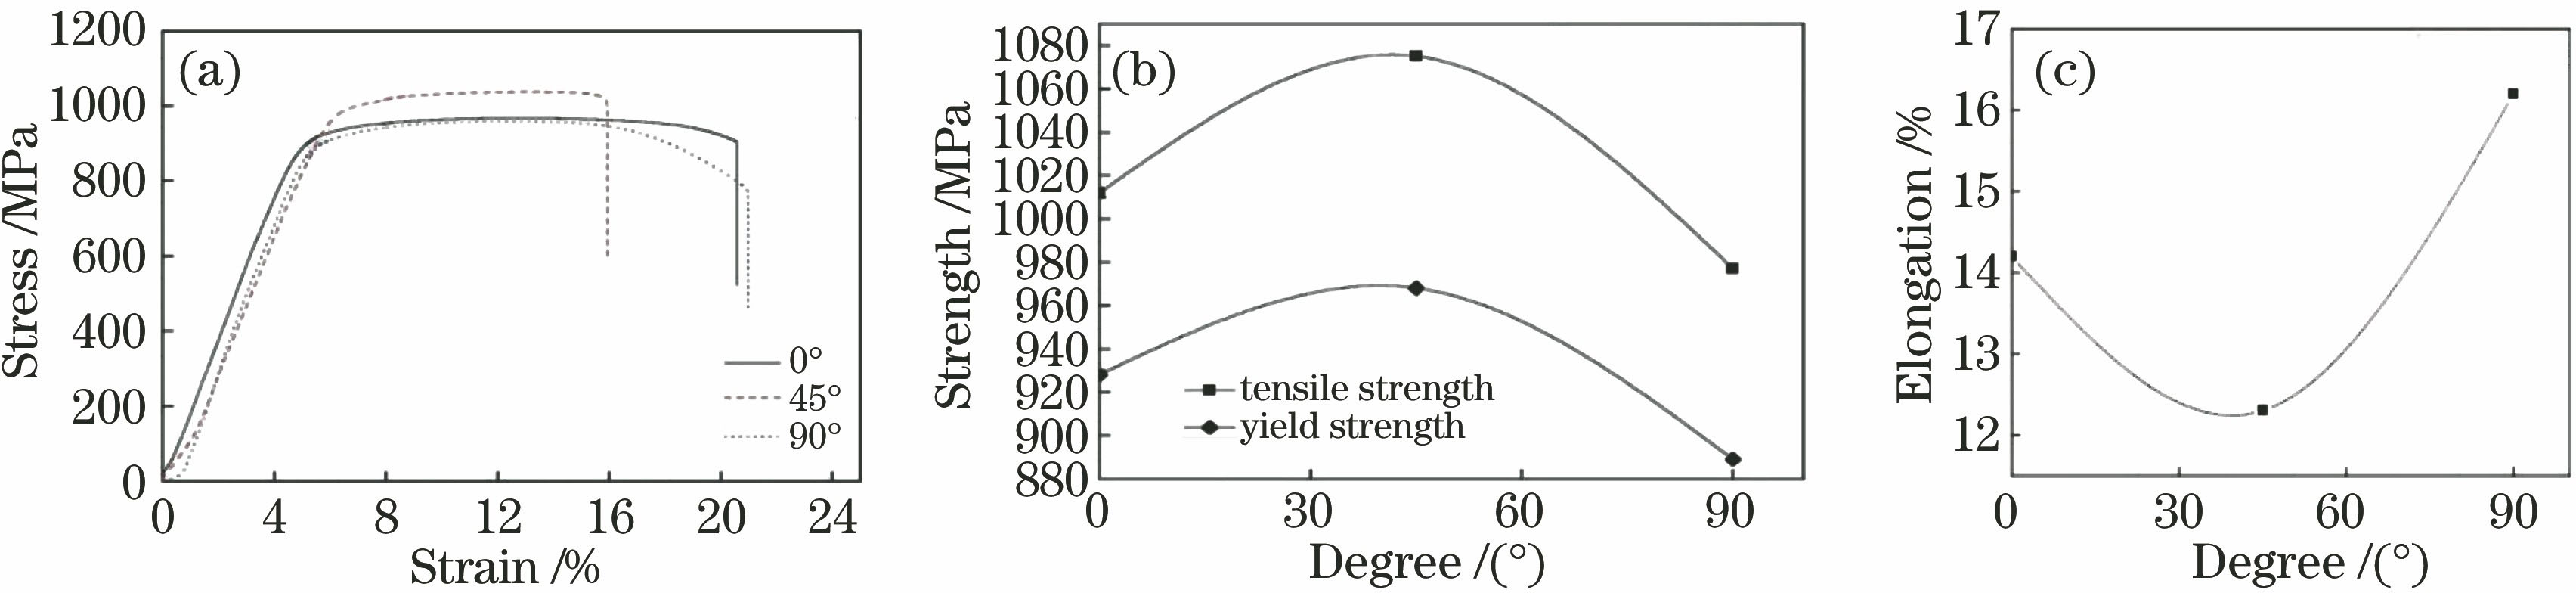 Anisotropy of tensile properties of sample. (a) Stress-strain curve; (b) strength; (c) elongation